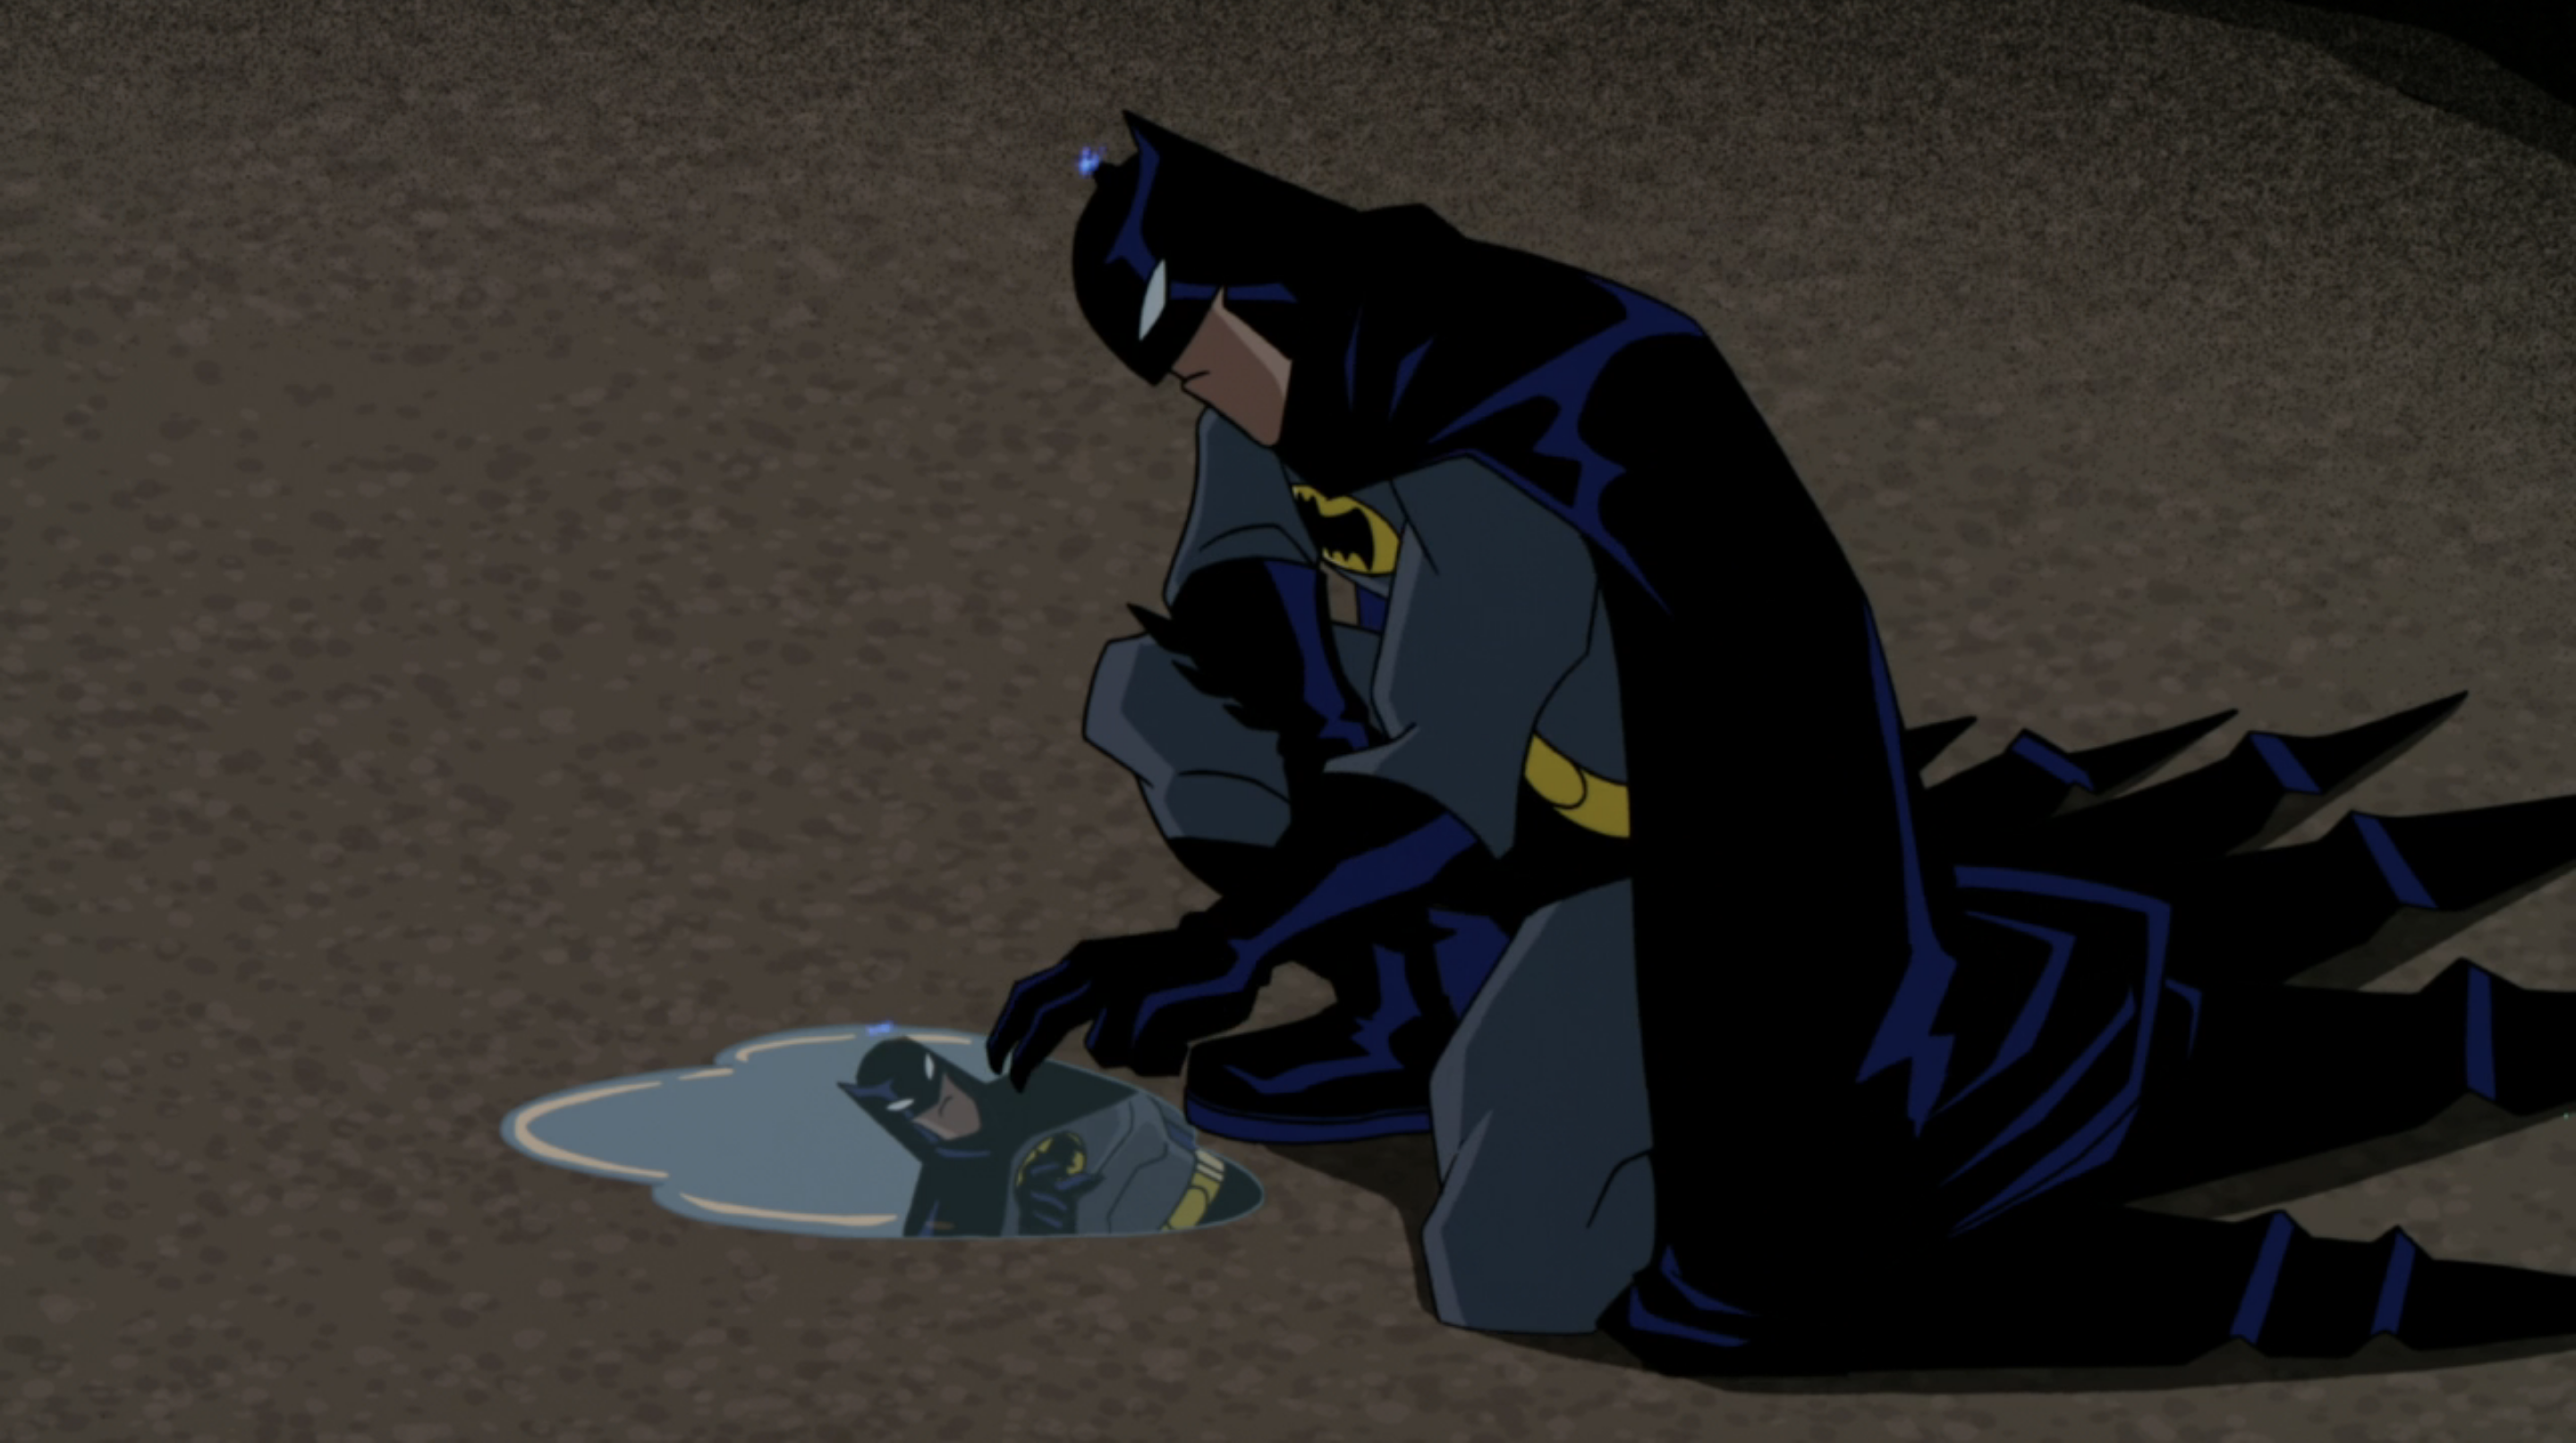 Batman looking at himself in a puddle on the ground